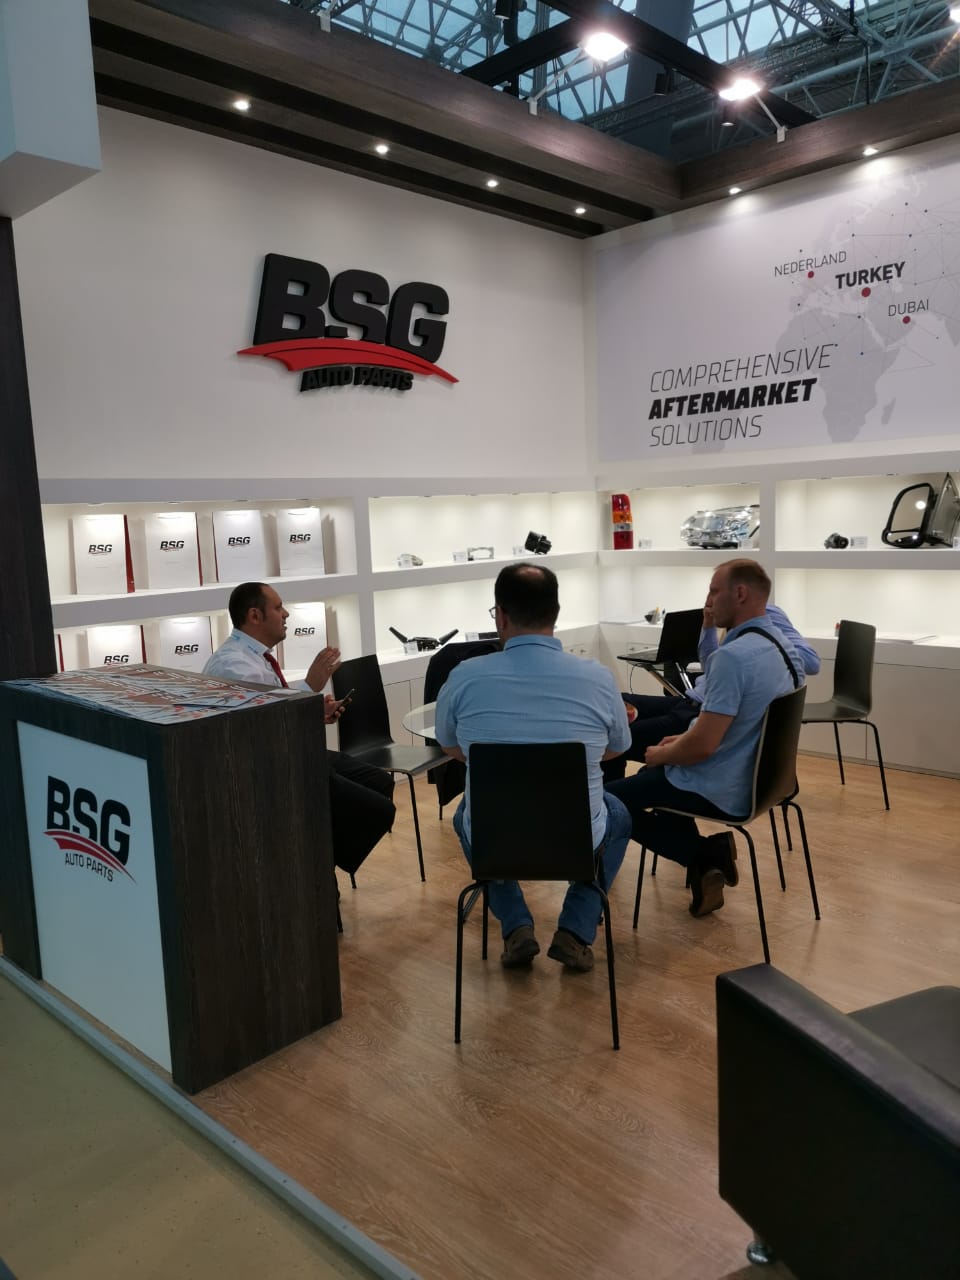 <p>BSG Auto Parts, one of the Turkey's leading aftermarket parts brands joined the 13th. Automechanika Moscow which is held on 26 to 29 August 2019. This is the biggest trade expo in the CIS and Russian region. </p>

<p>Approximately 30,000 people from all over the world visited Russia's most important automotive supplier industry expo in Russia. As one of the biggest exhibitors, BSG came together with its current and potential business partners, as a high quality parts supplier for automobiles and light commercial vehicles, including accessory, equipment and other related parts. </p>